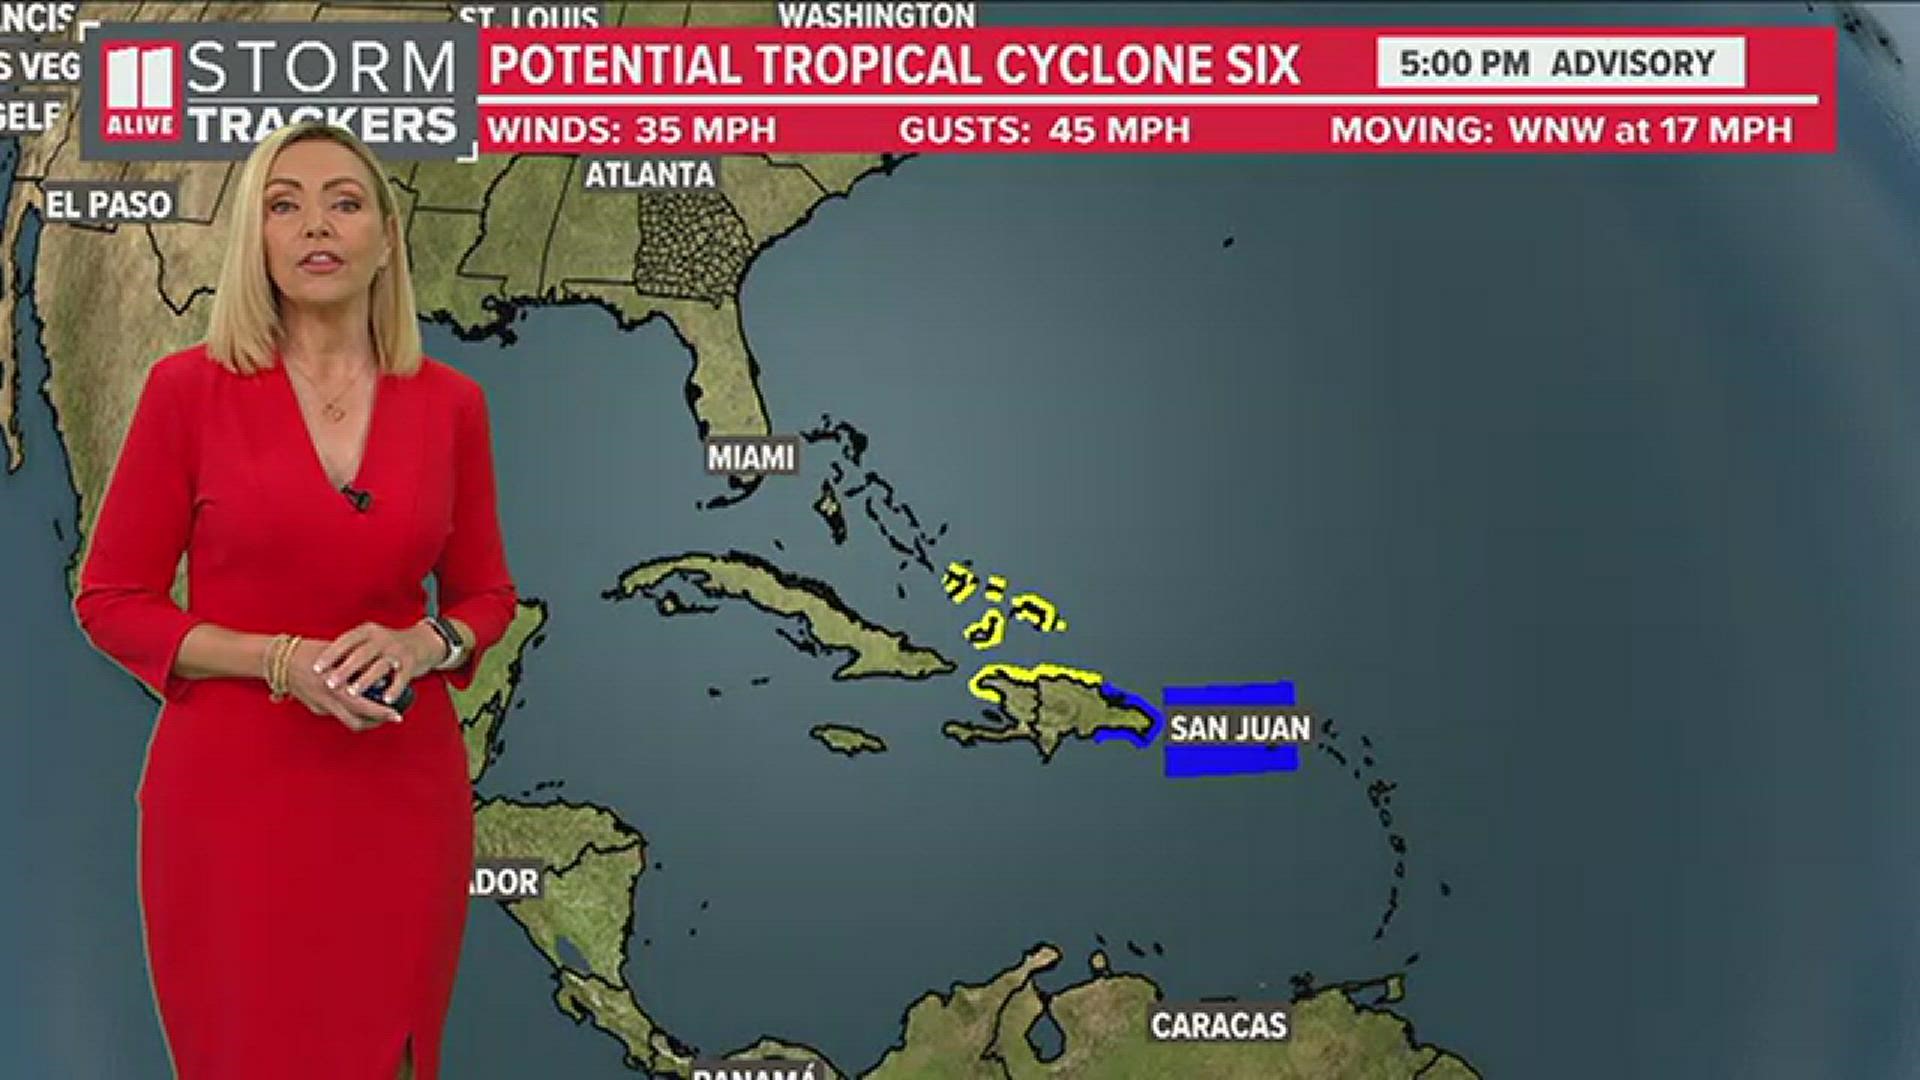 11Alive is keeping an eye on the tropics.